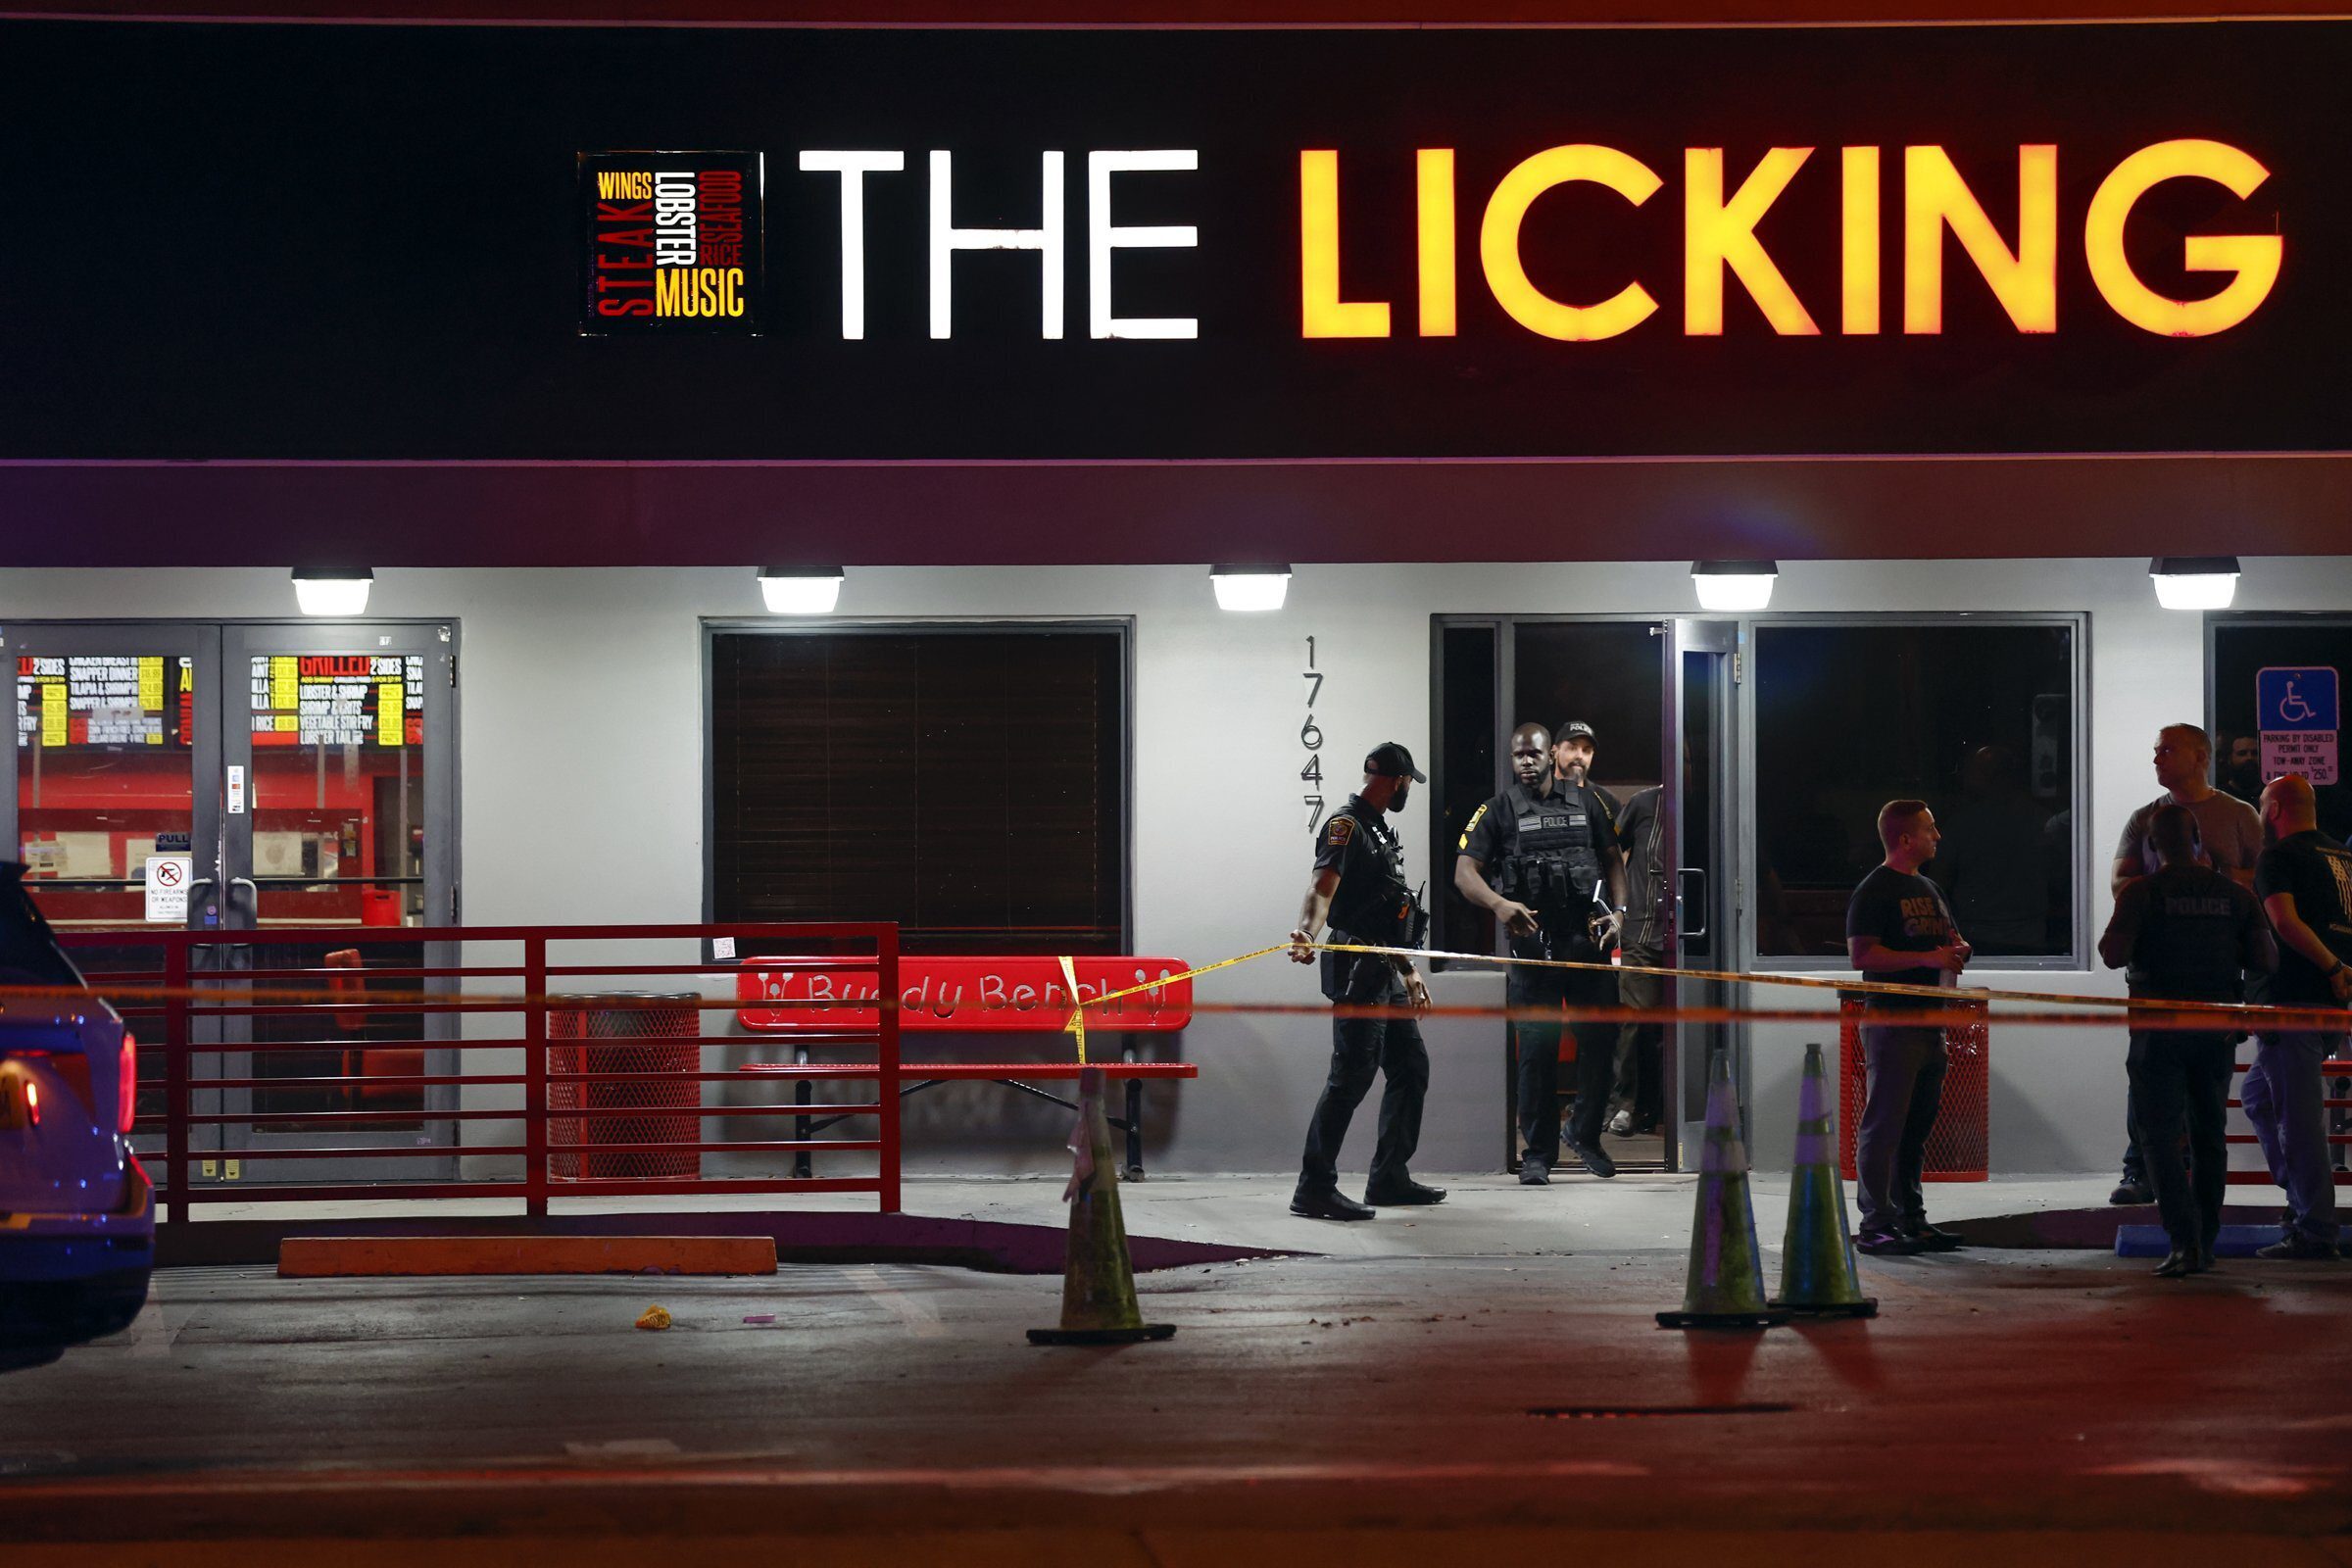 Miami Gardens police officers respond to The Licking Restaurant after multiple people were reportedly shot Thursday night Jan. 5, 2023 in Miami Gardens, Fla. Investigators were looking into reports that a video was being shot at the restaurant, Miami Gardens Police Chief Delma Noel-Pratt said. (Al Diaz/Miami Herald via AP)